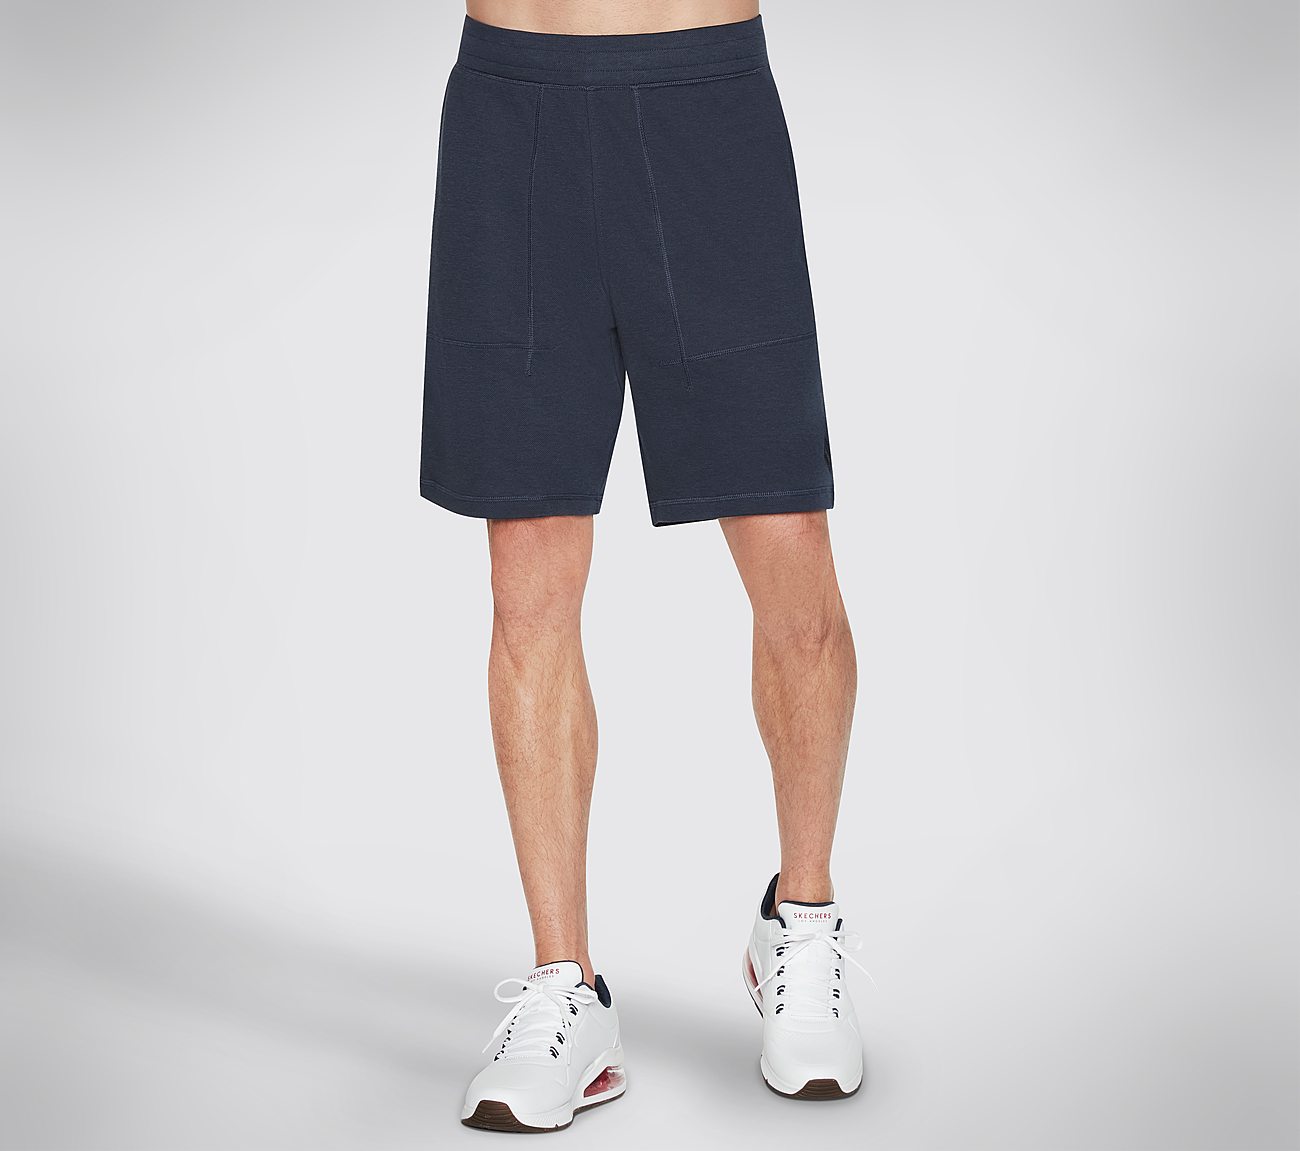 GOKNIT PIQUE 9IN SHORT, NNNAVY Apparel Lateral View